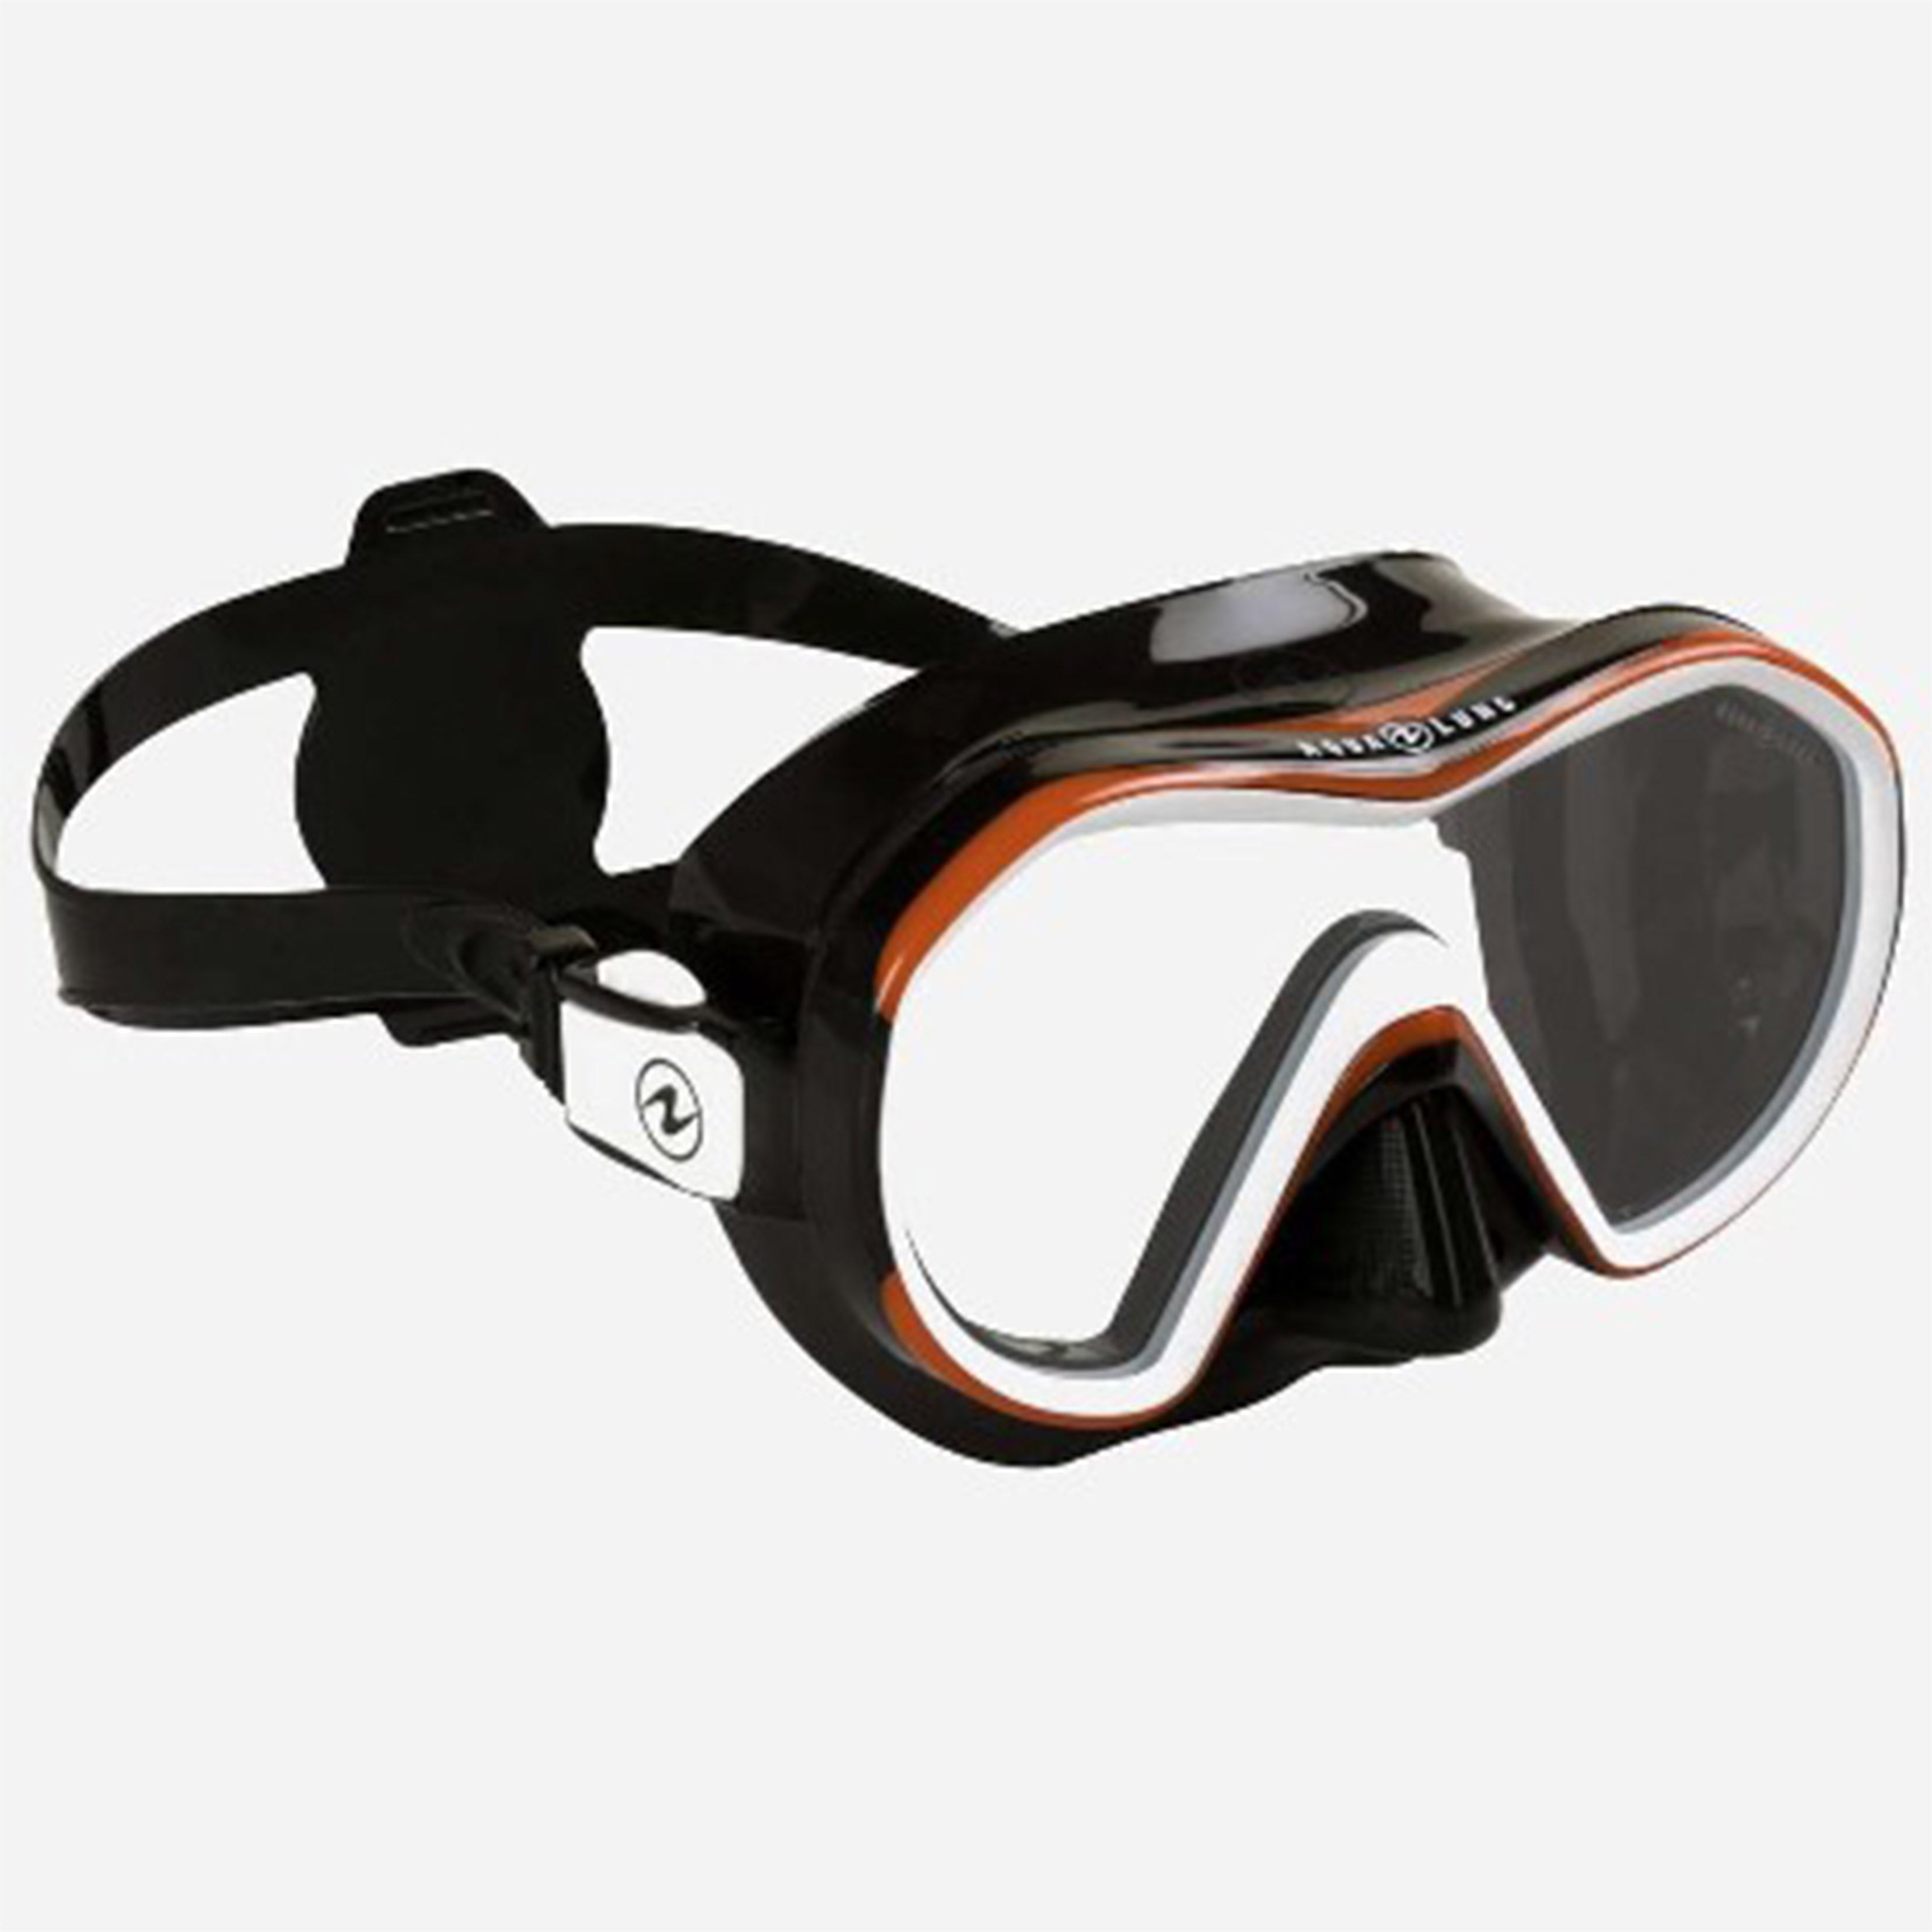 AQUALUNG REVEAL 1 MASK-BLACK&RED